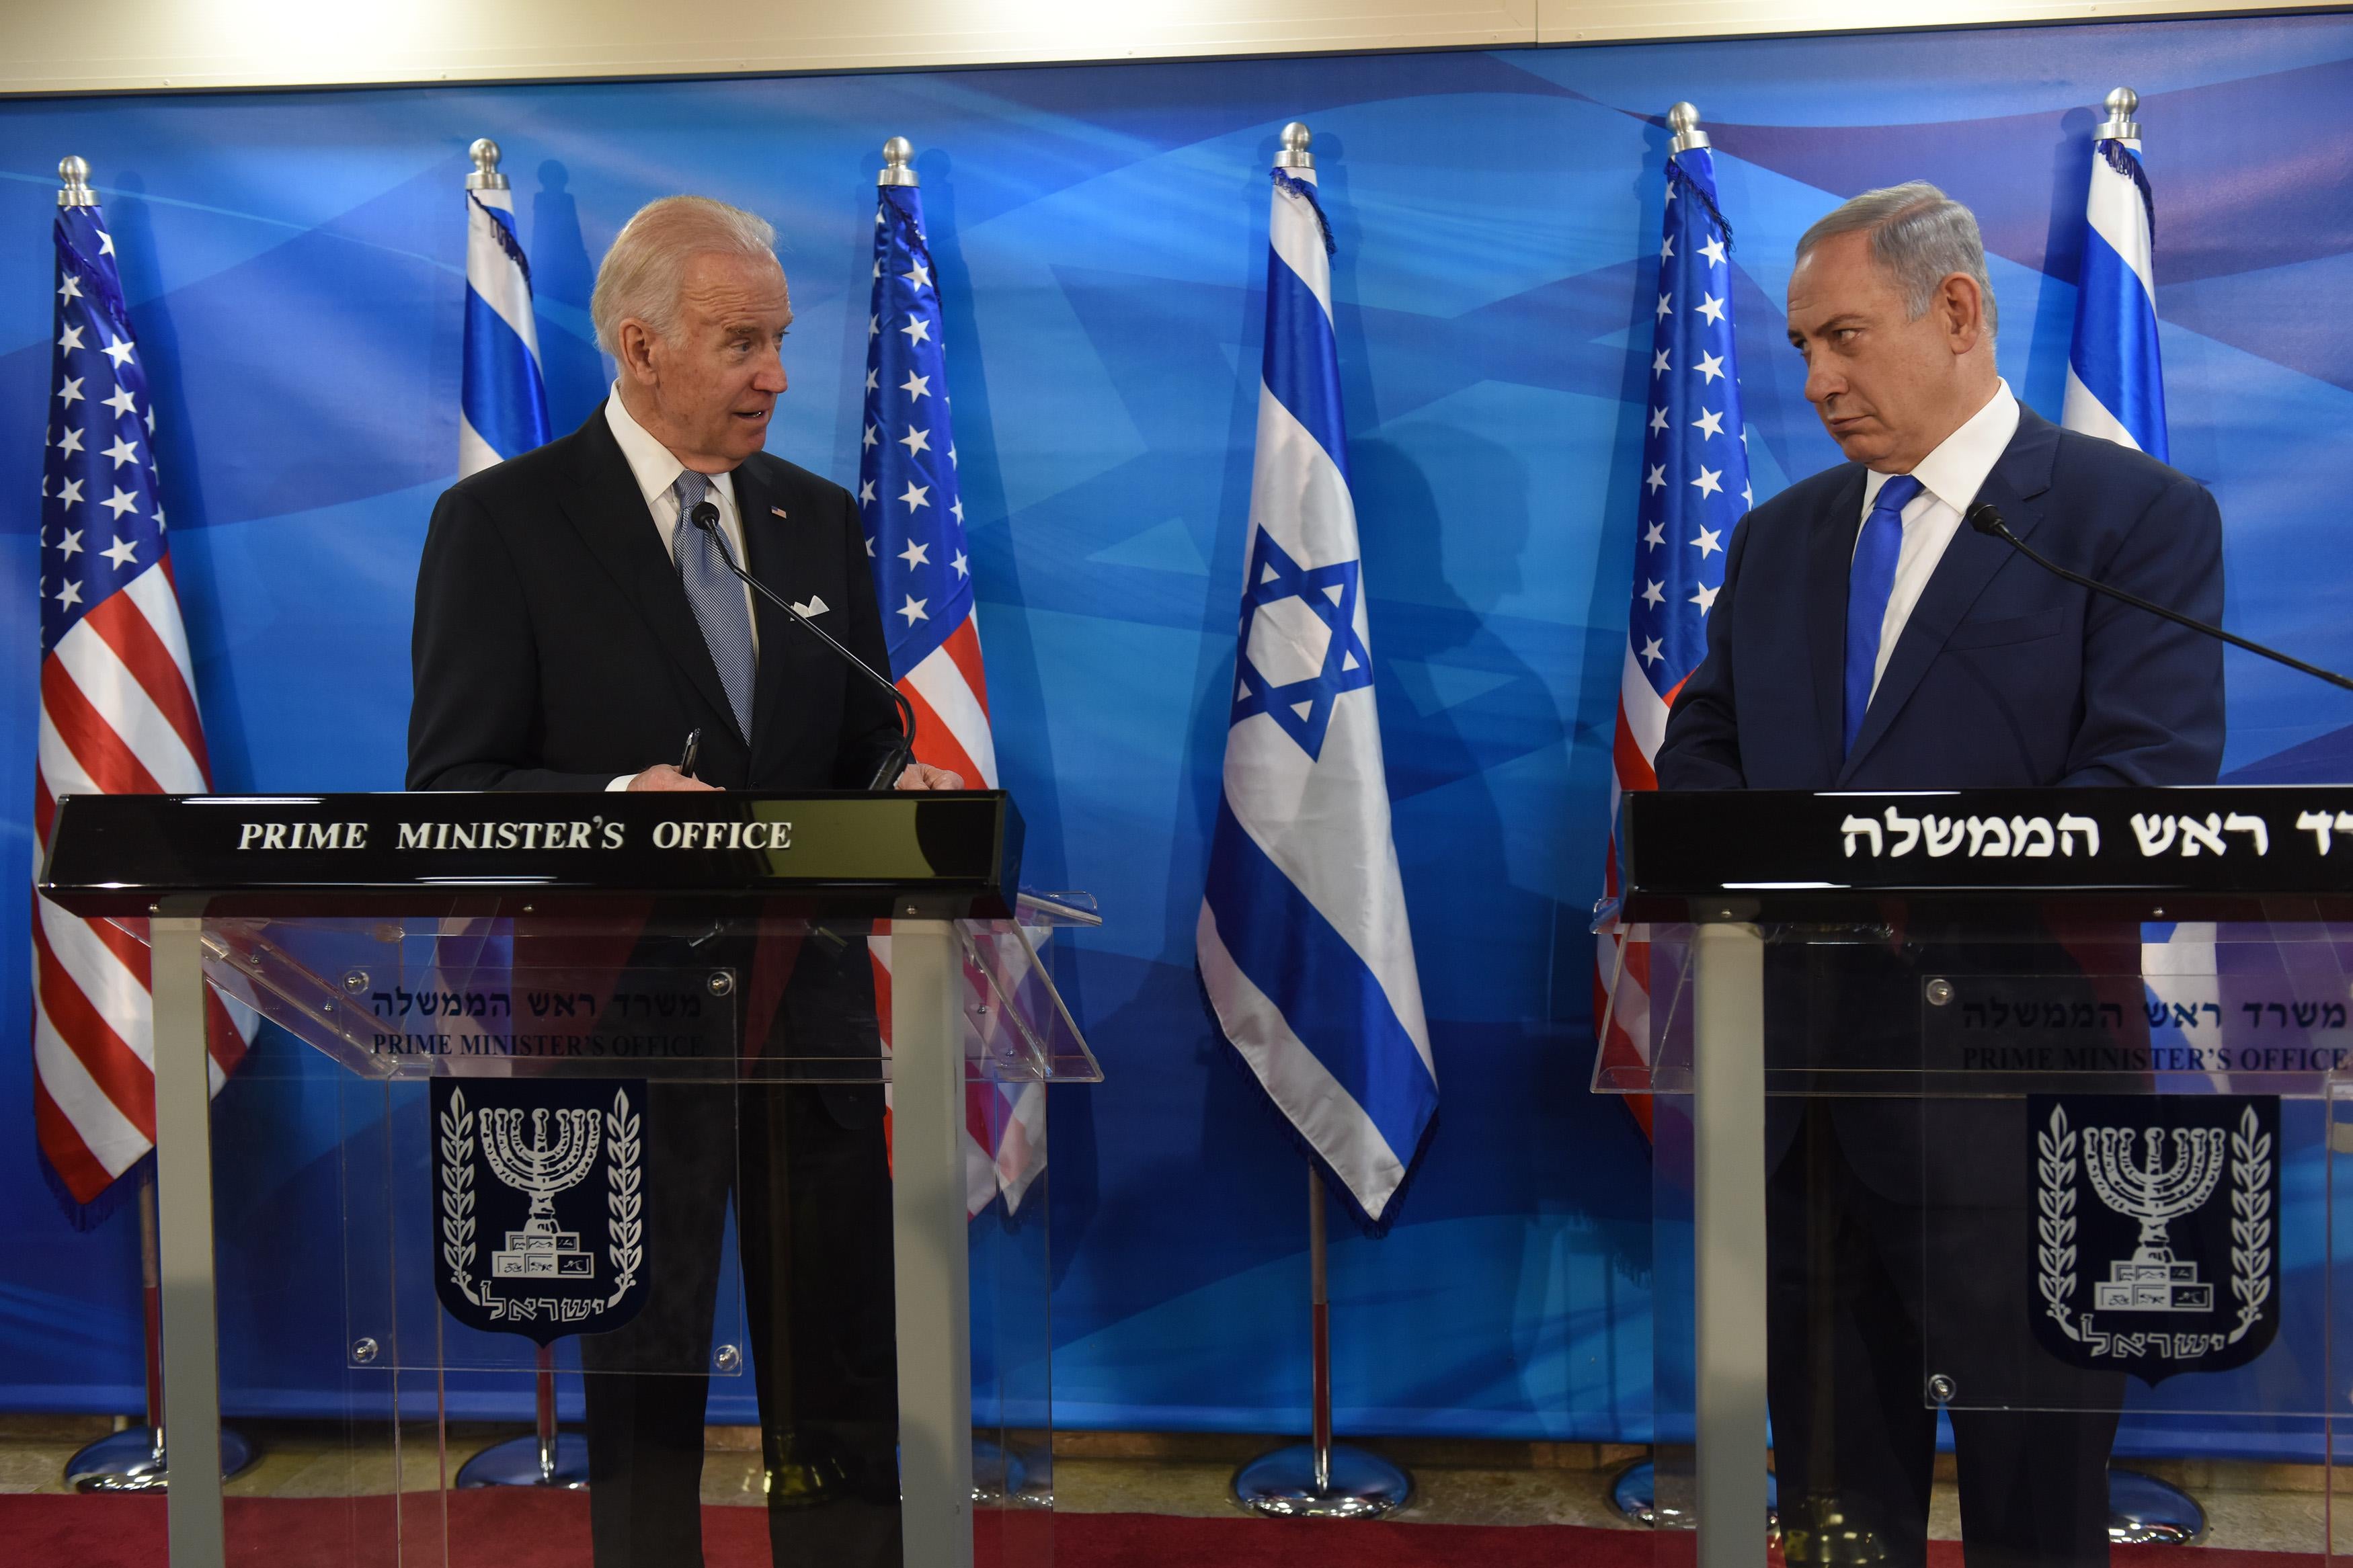 US Vice President Joe Biden and Israeli Prime Minister Benjamin Netanyahu give joint statements to press in the prime minister's office in Jerusalem on March 9, 2016. Biden implicitly criticised Palestinian leaders for not condemning attacks against Israelis, as an upsurge in violence marred his visit.

 / AFP / POOL AND AFP / DEBBIE HILL        (Photo credit should read DEBBIE HILL/AFP via Getty Images)